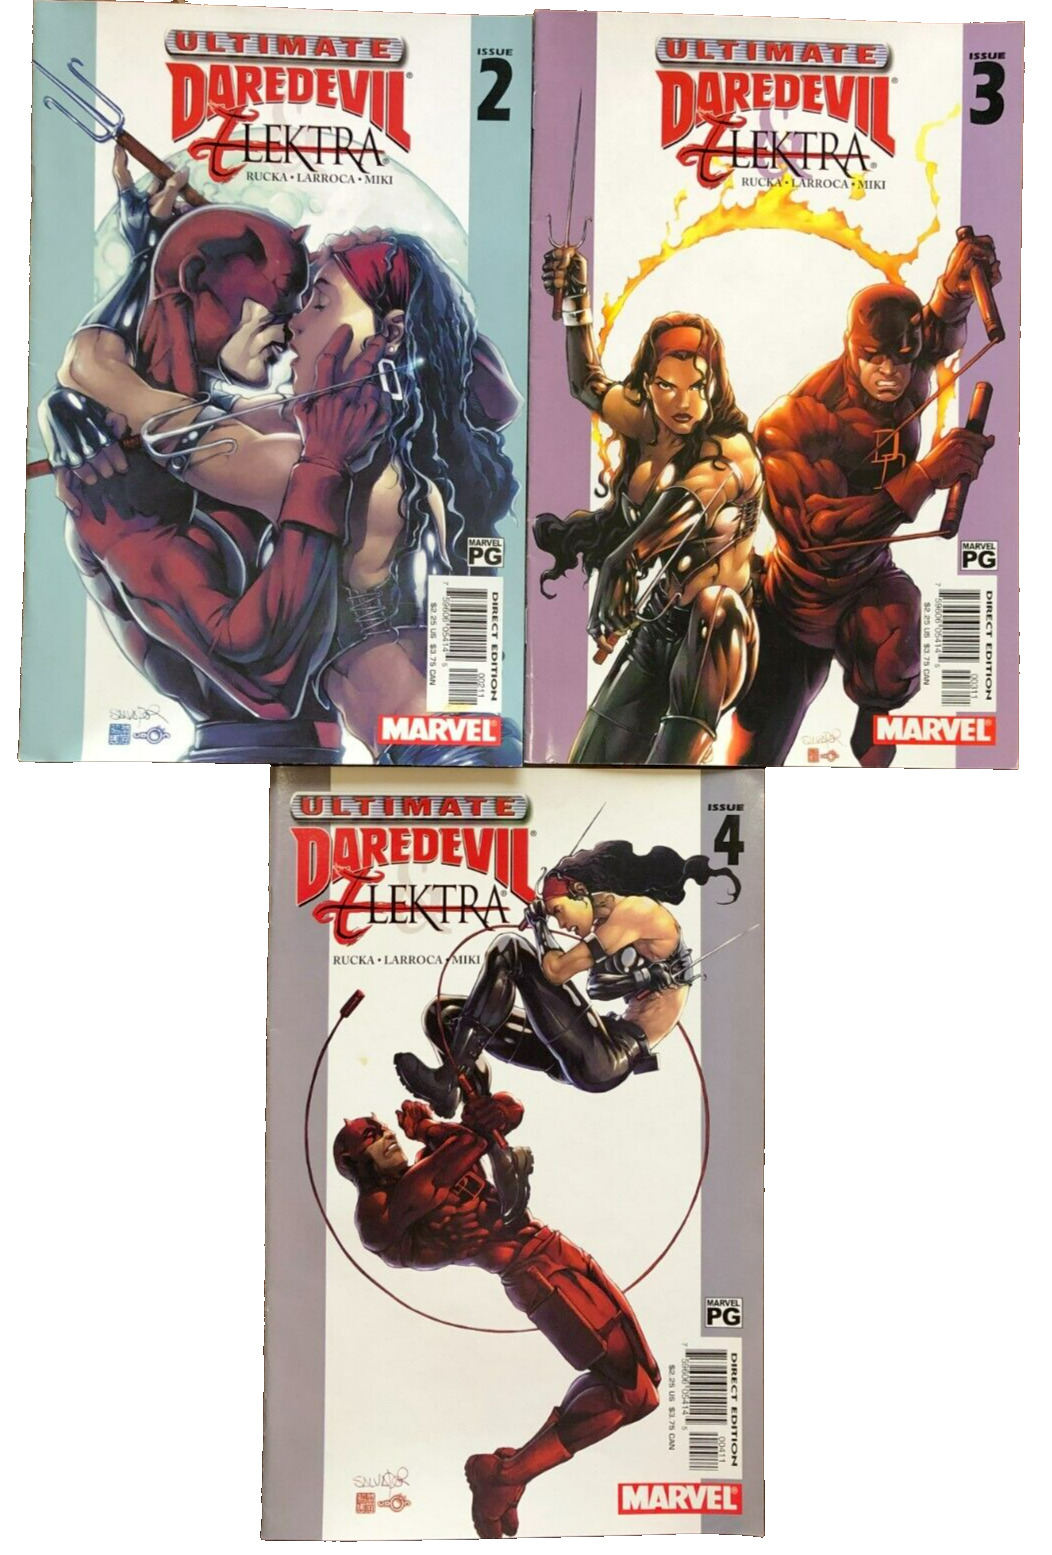 Lot of 3 Marvel Comic Books Ultimate DAREDEVIL and ELEKTRA Vol. 1 Issues 2, 3, 4